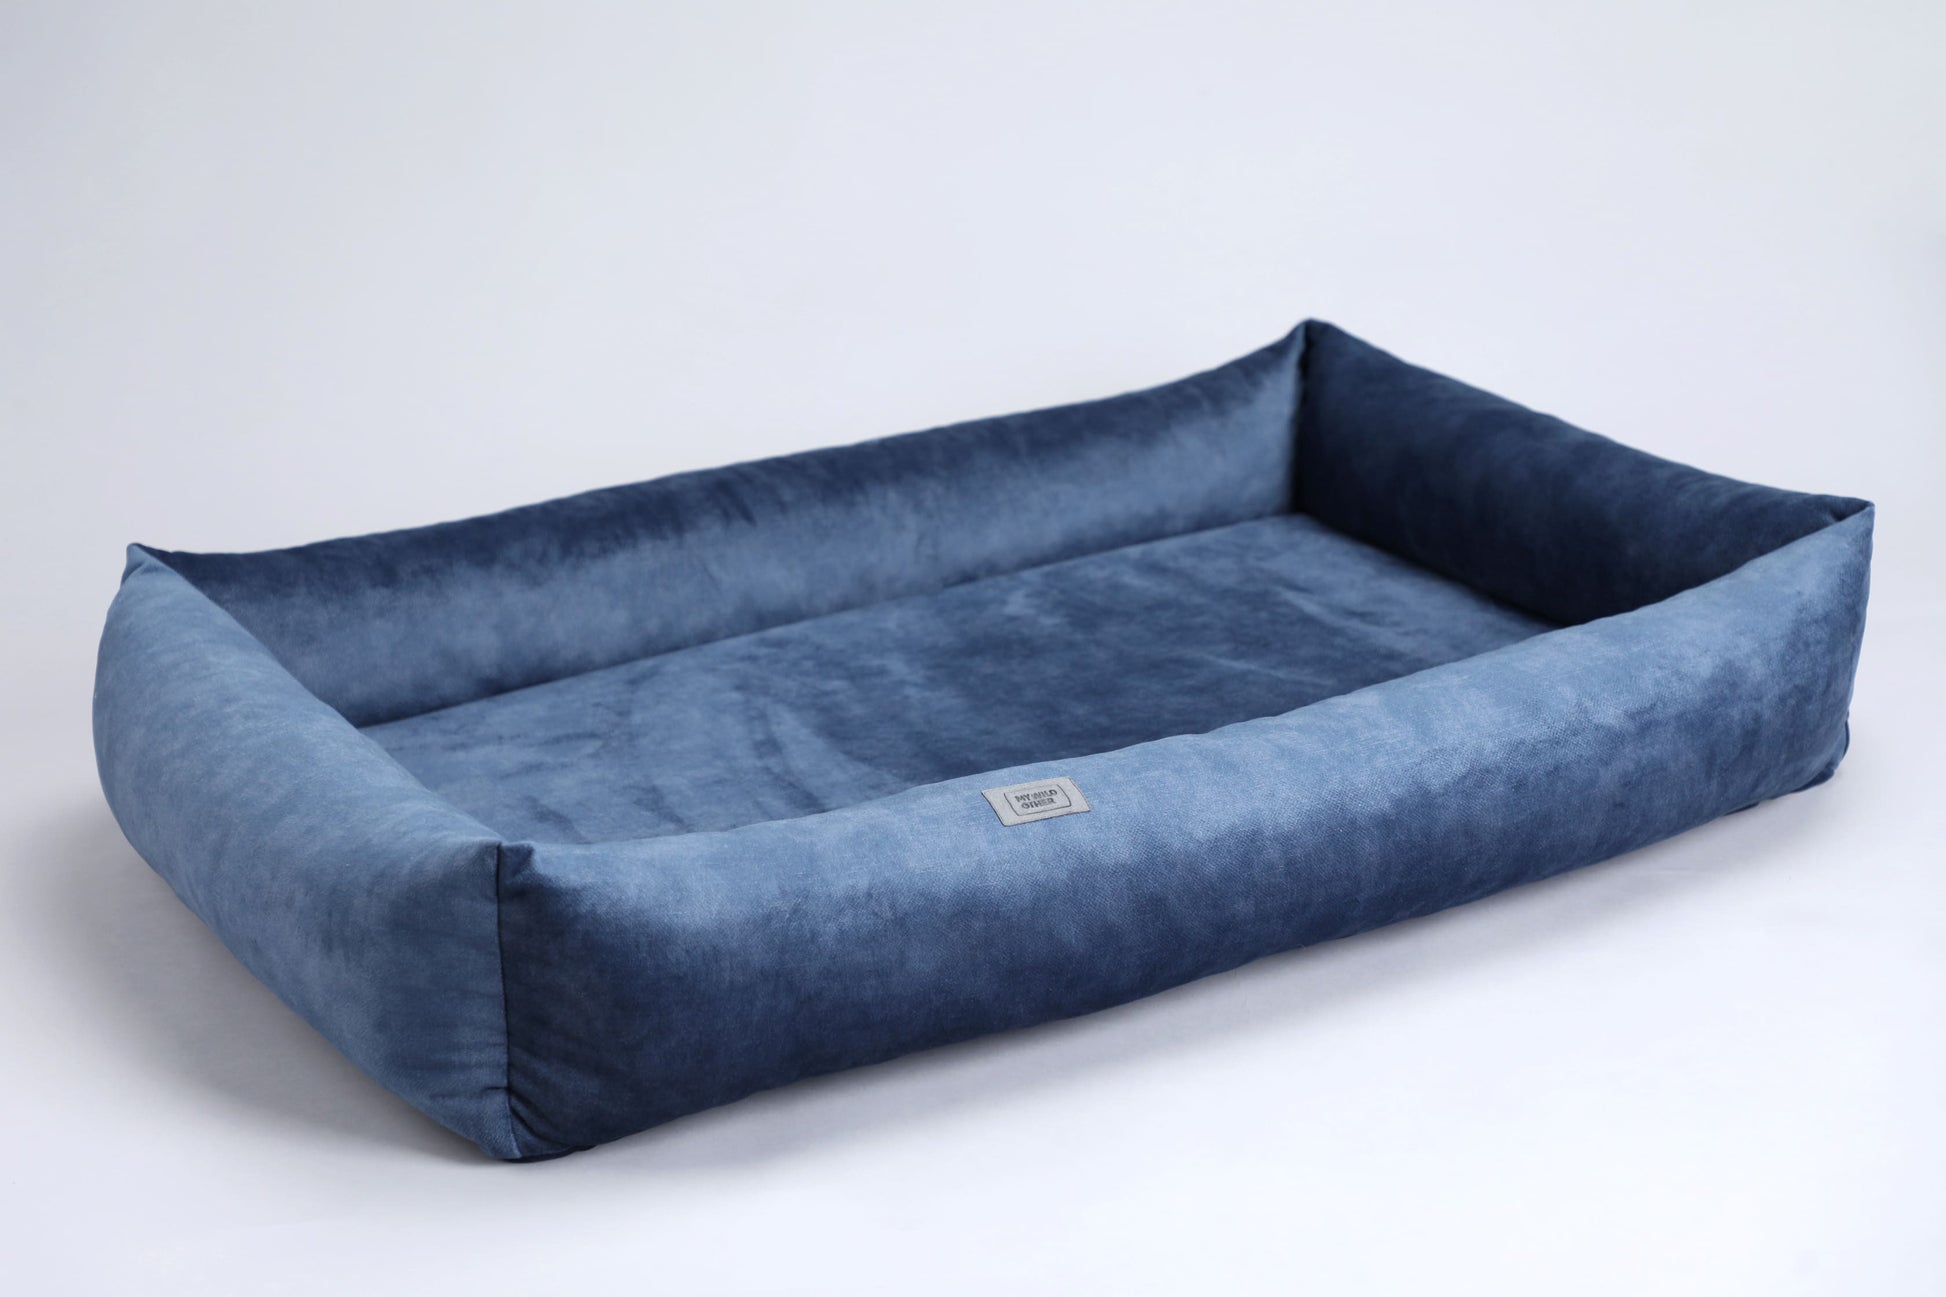 2-sided classic dog bed. SKY BLUE - European handmade dog accessories by My Wild Other